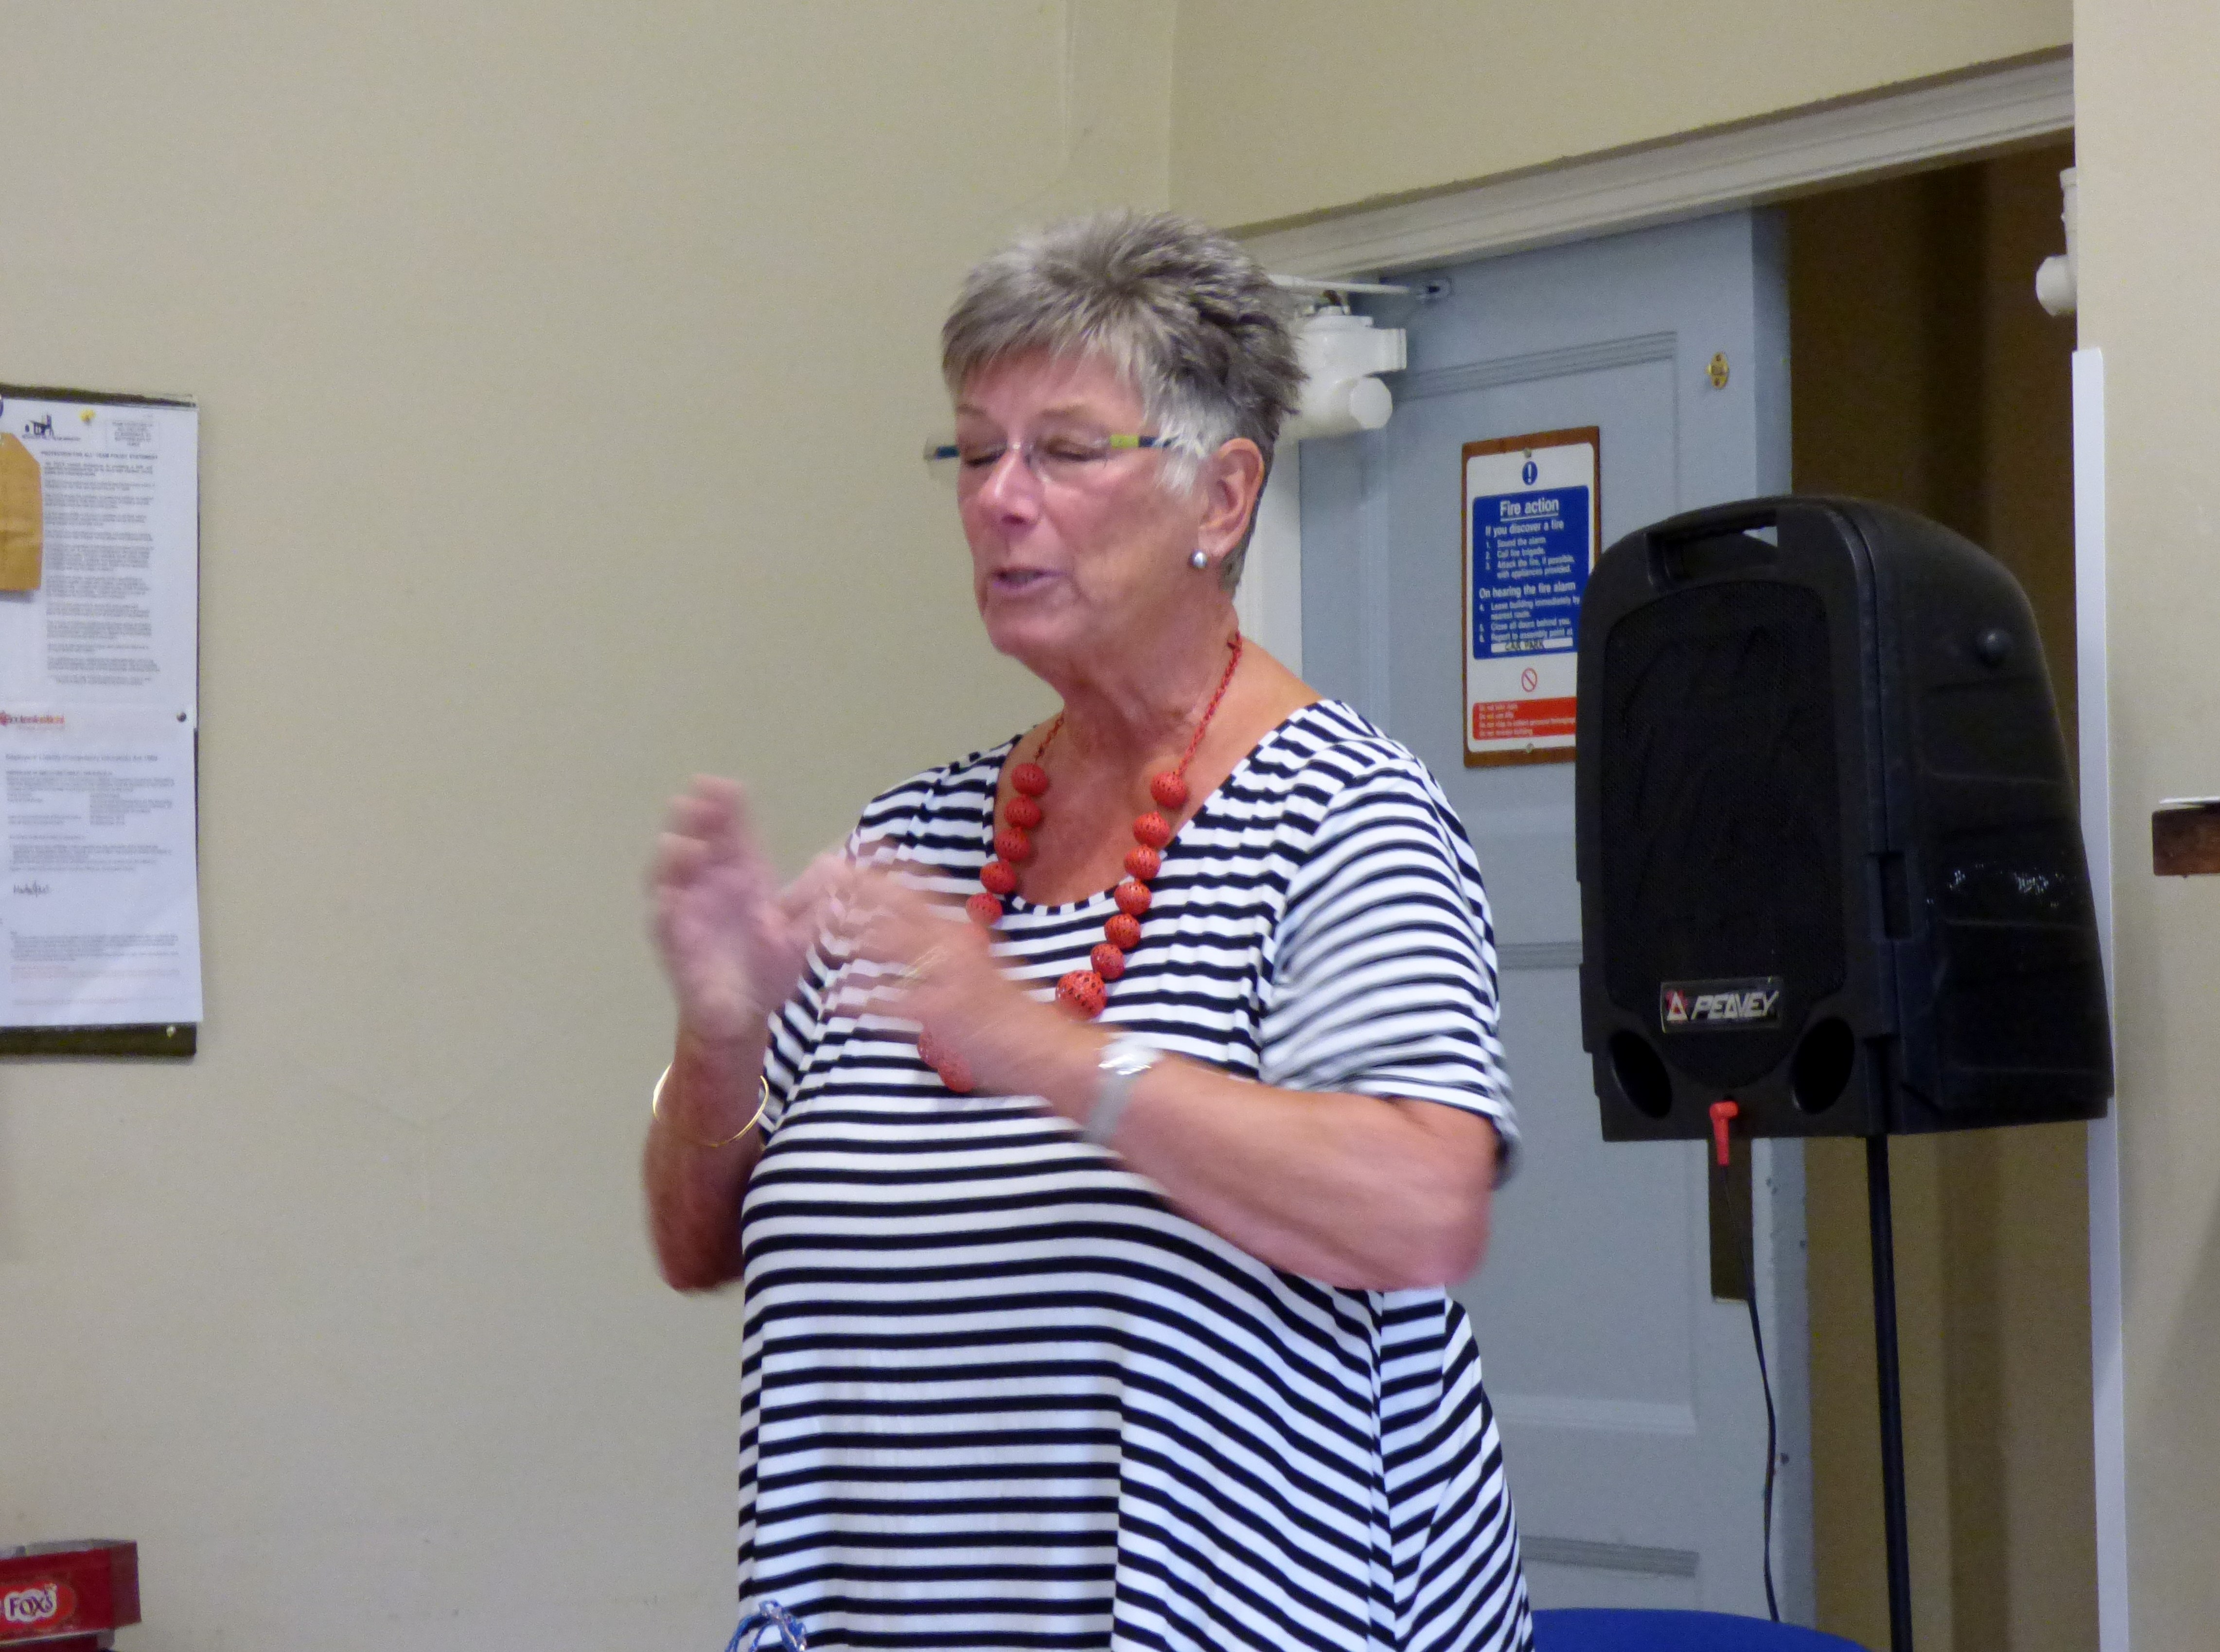 Liz Smith of Glossop EG speaking to Merseyside EG about Glossop's group project